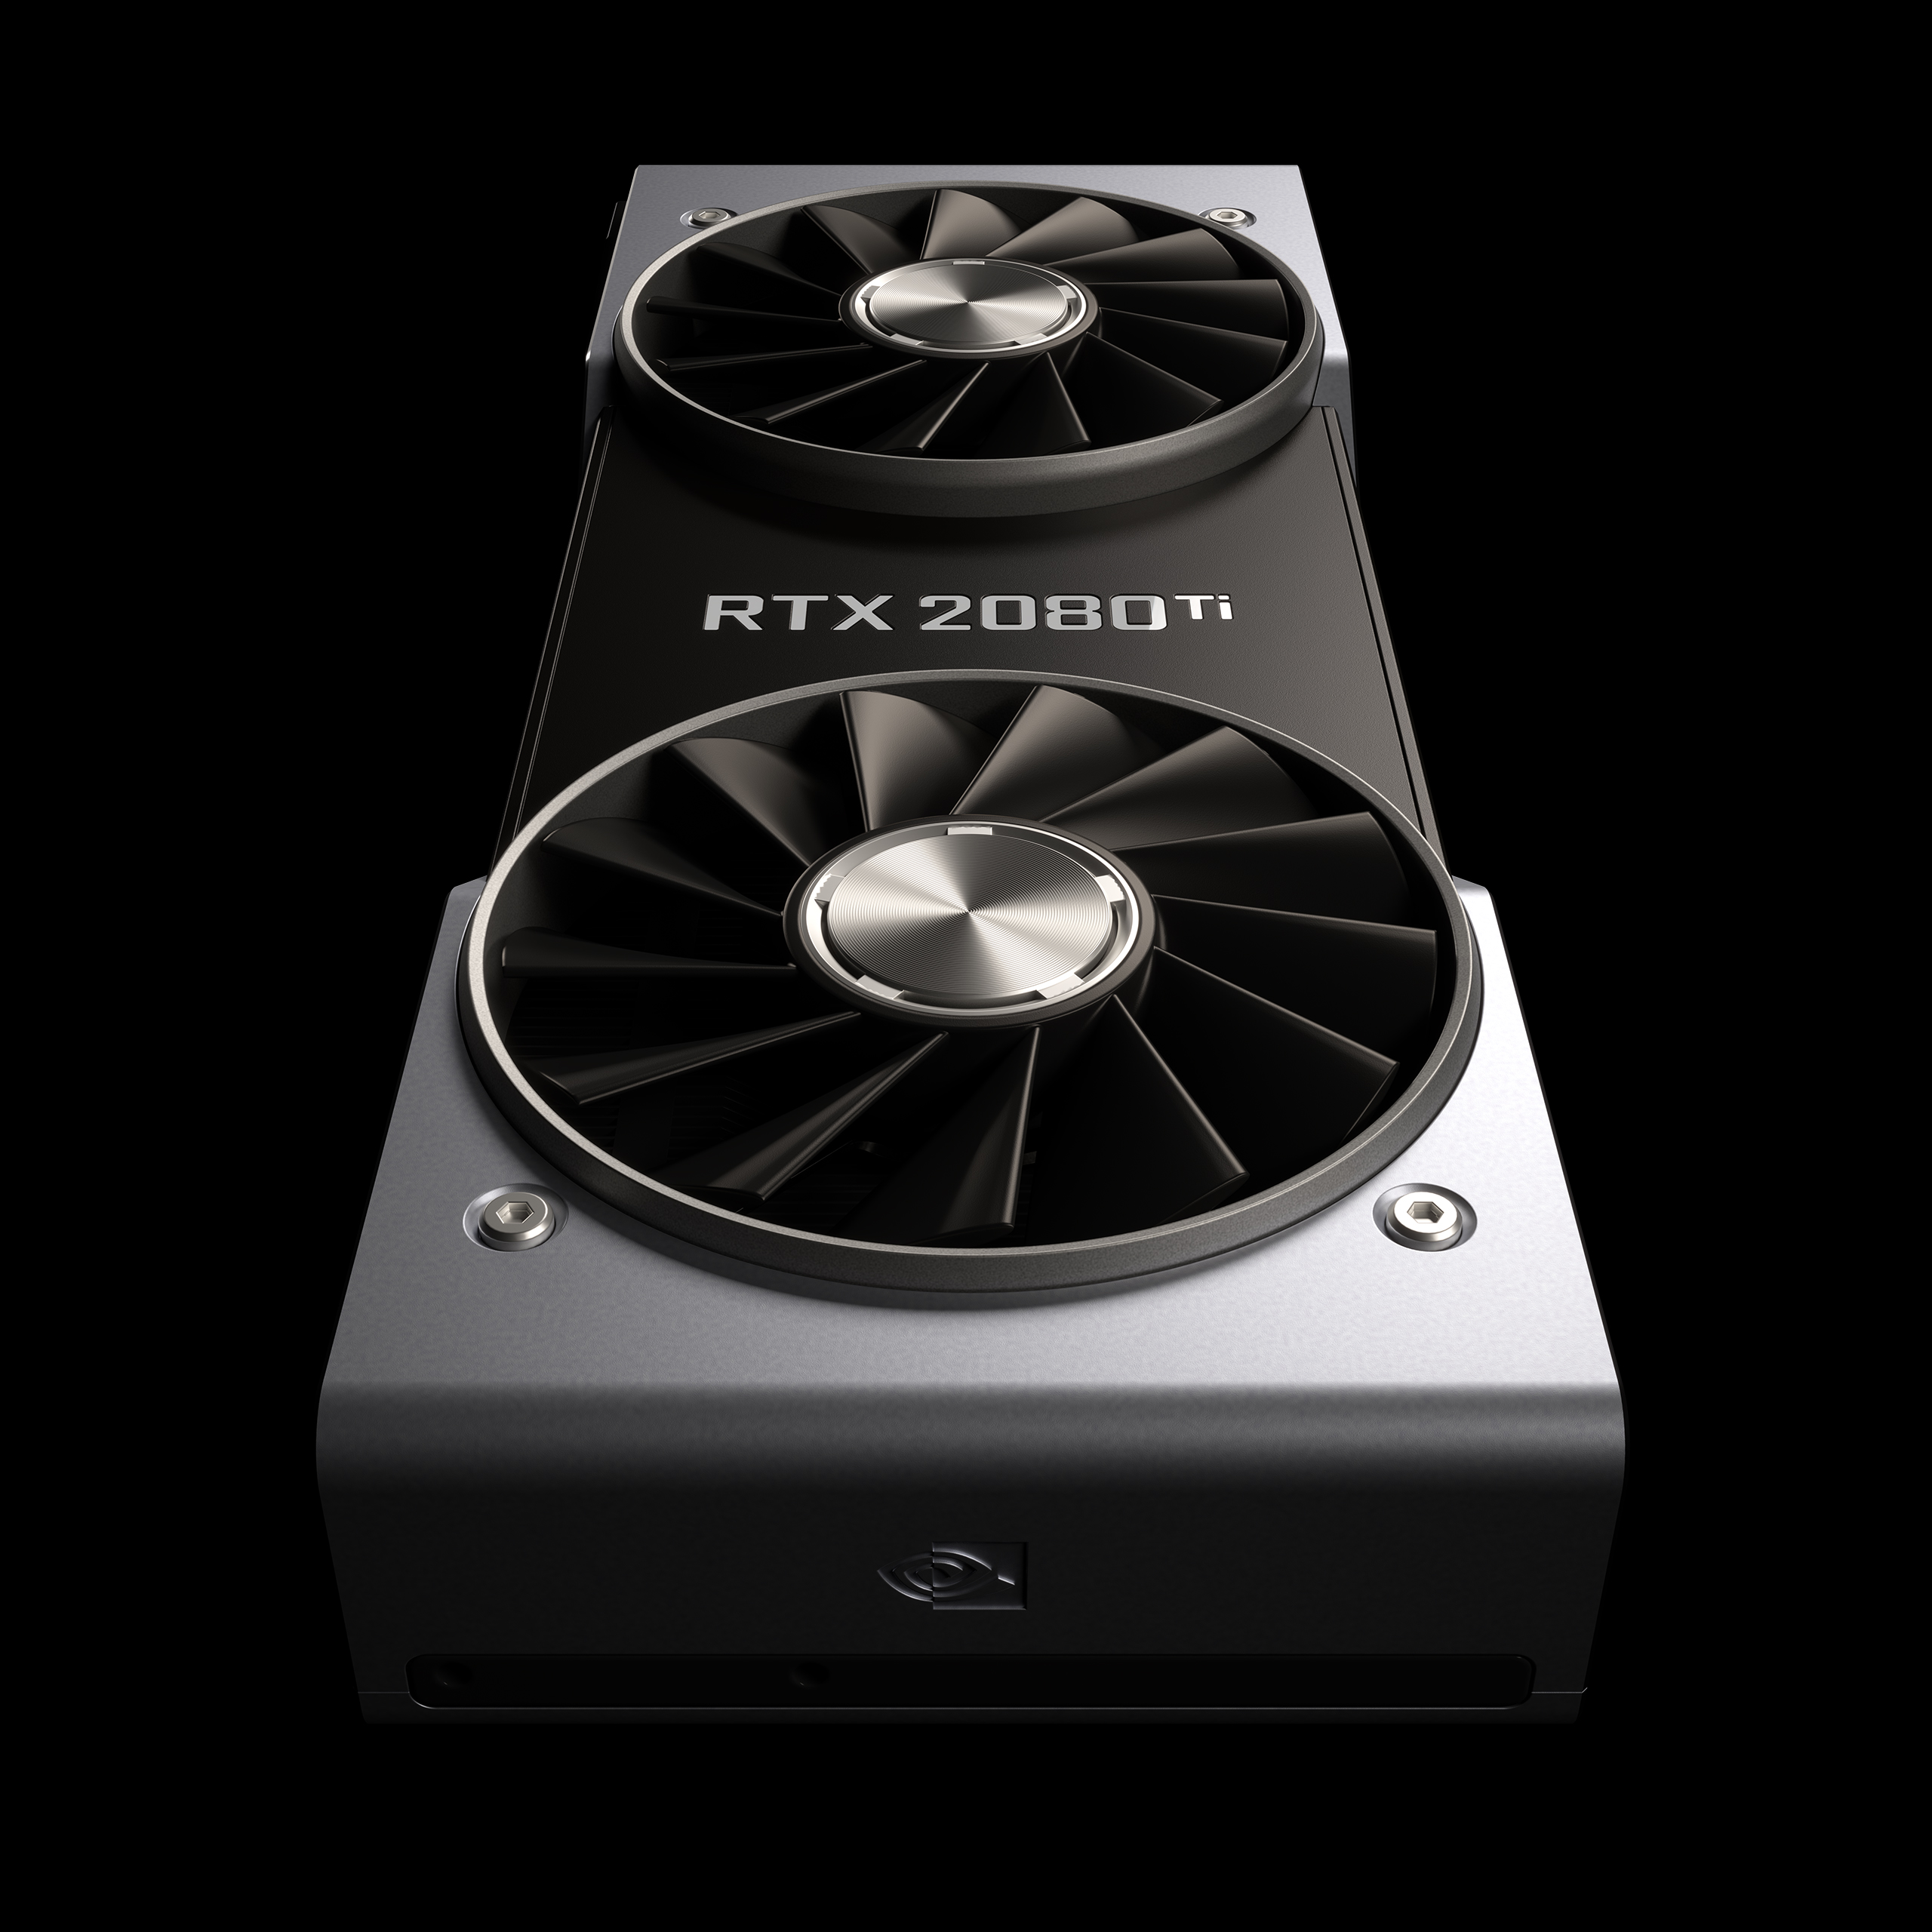 Example of a Graphics Card for Running Lumion | Lumion 3D Rendering Hardware